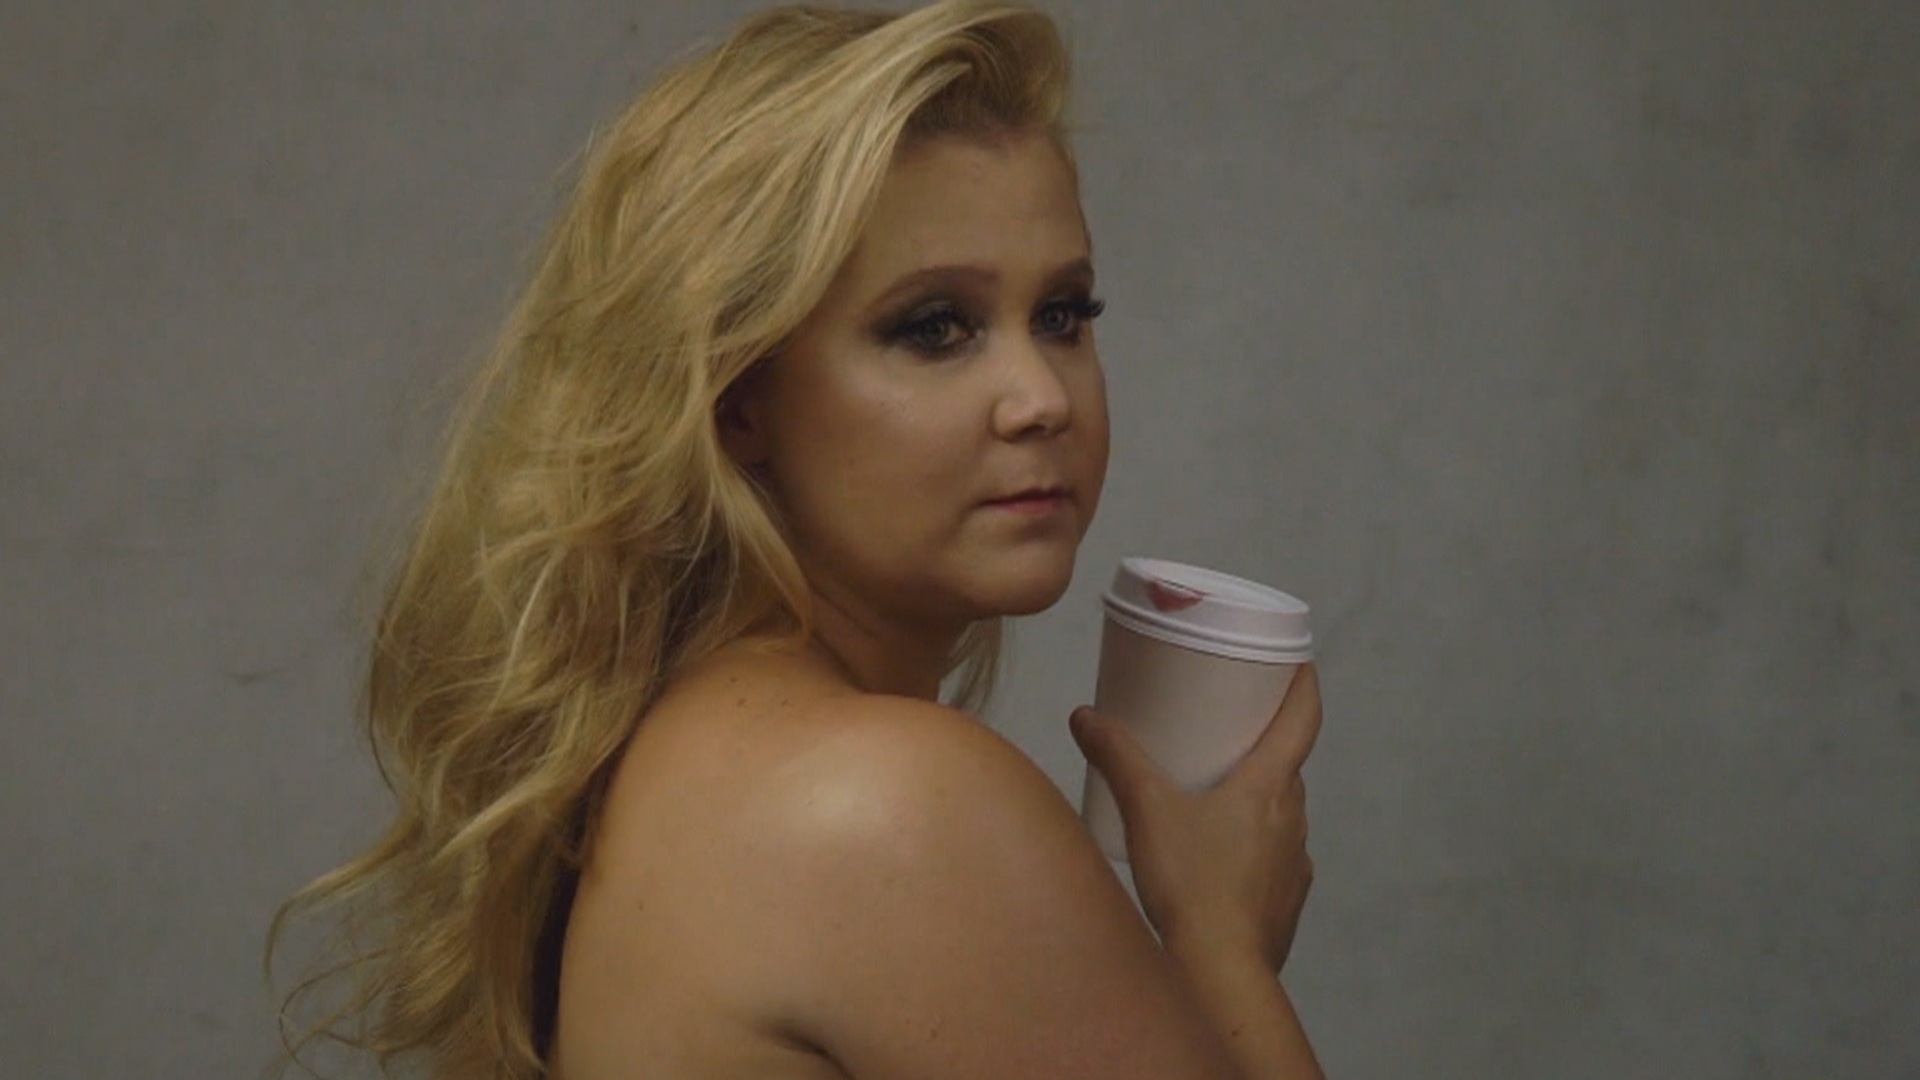 Amy schumer pictures sexy Photos: Amy